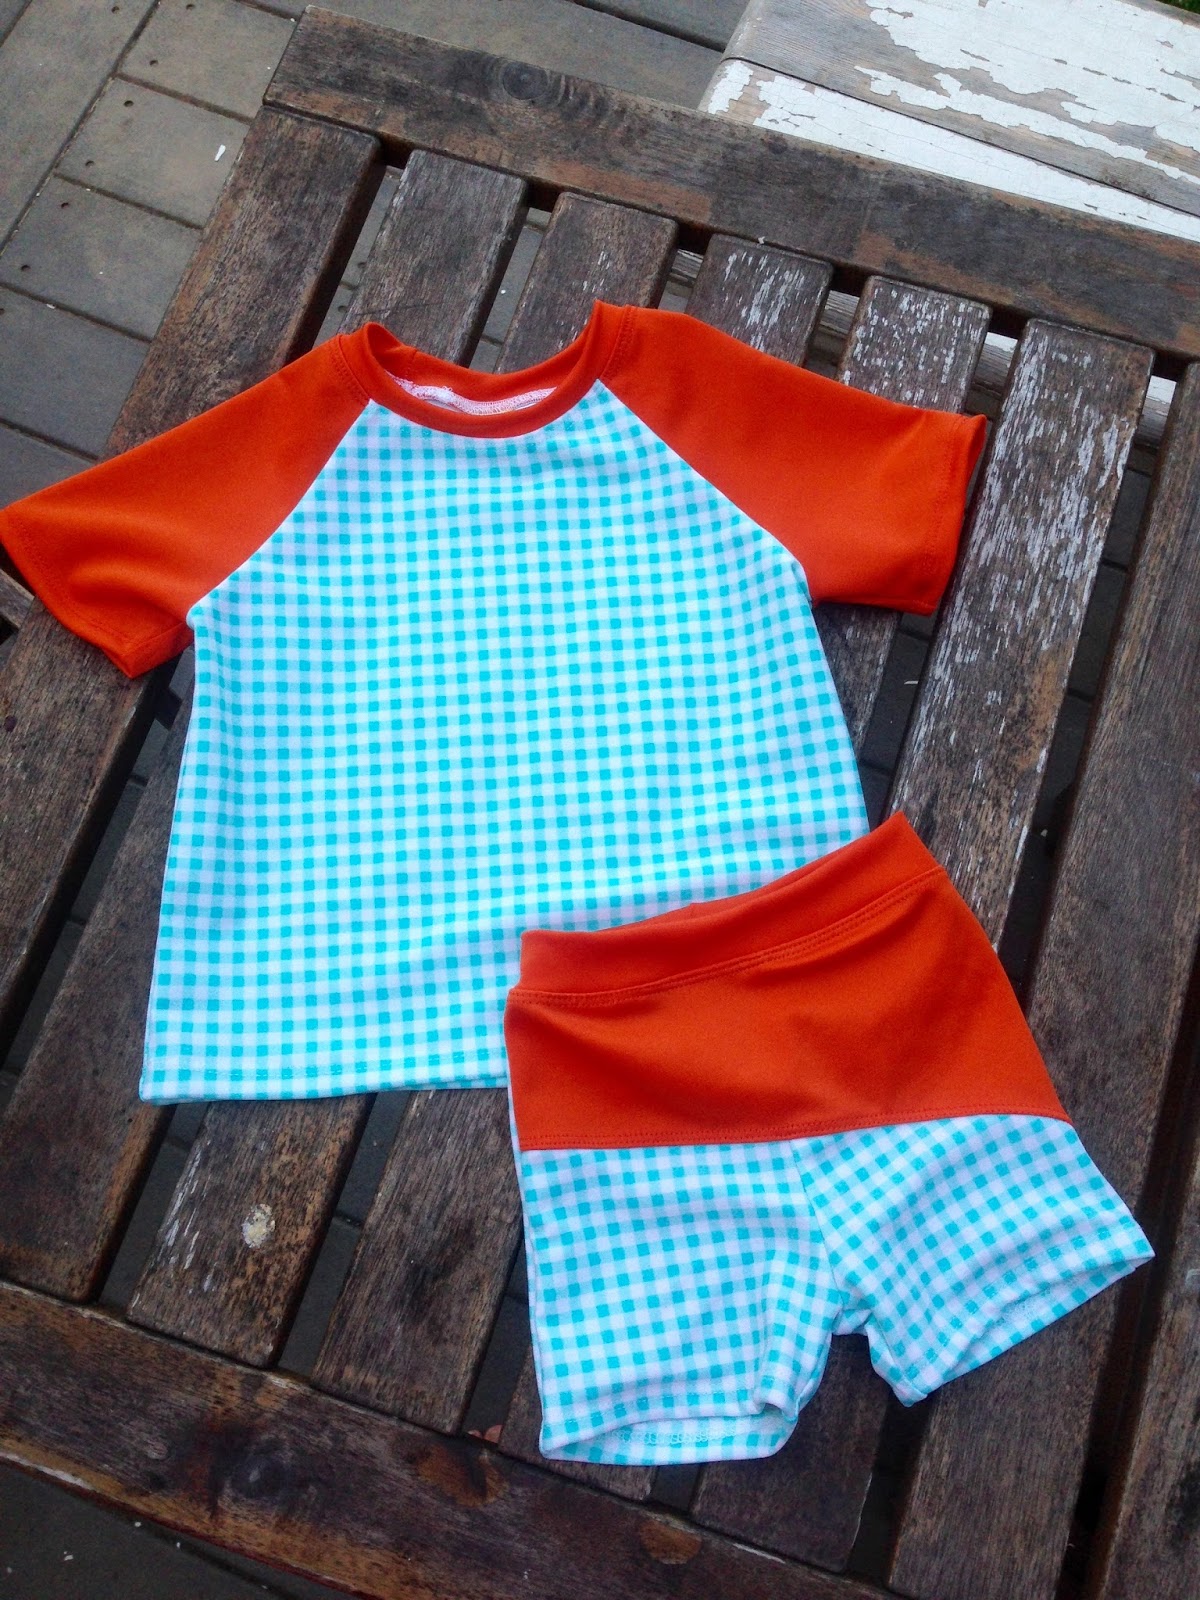 The Itinerant Seamstress: KCW Days 4 and 5: More Swimwear for Boys